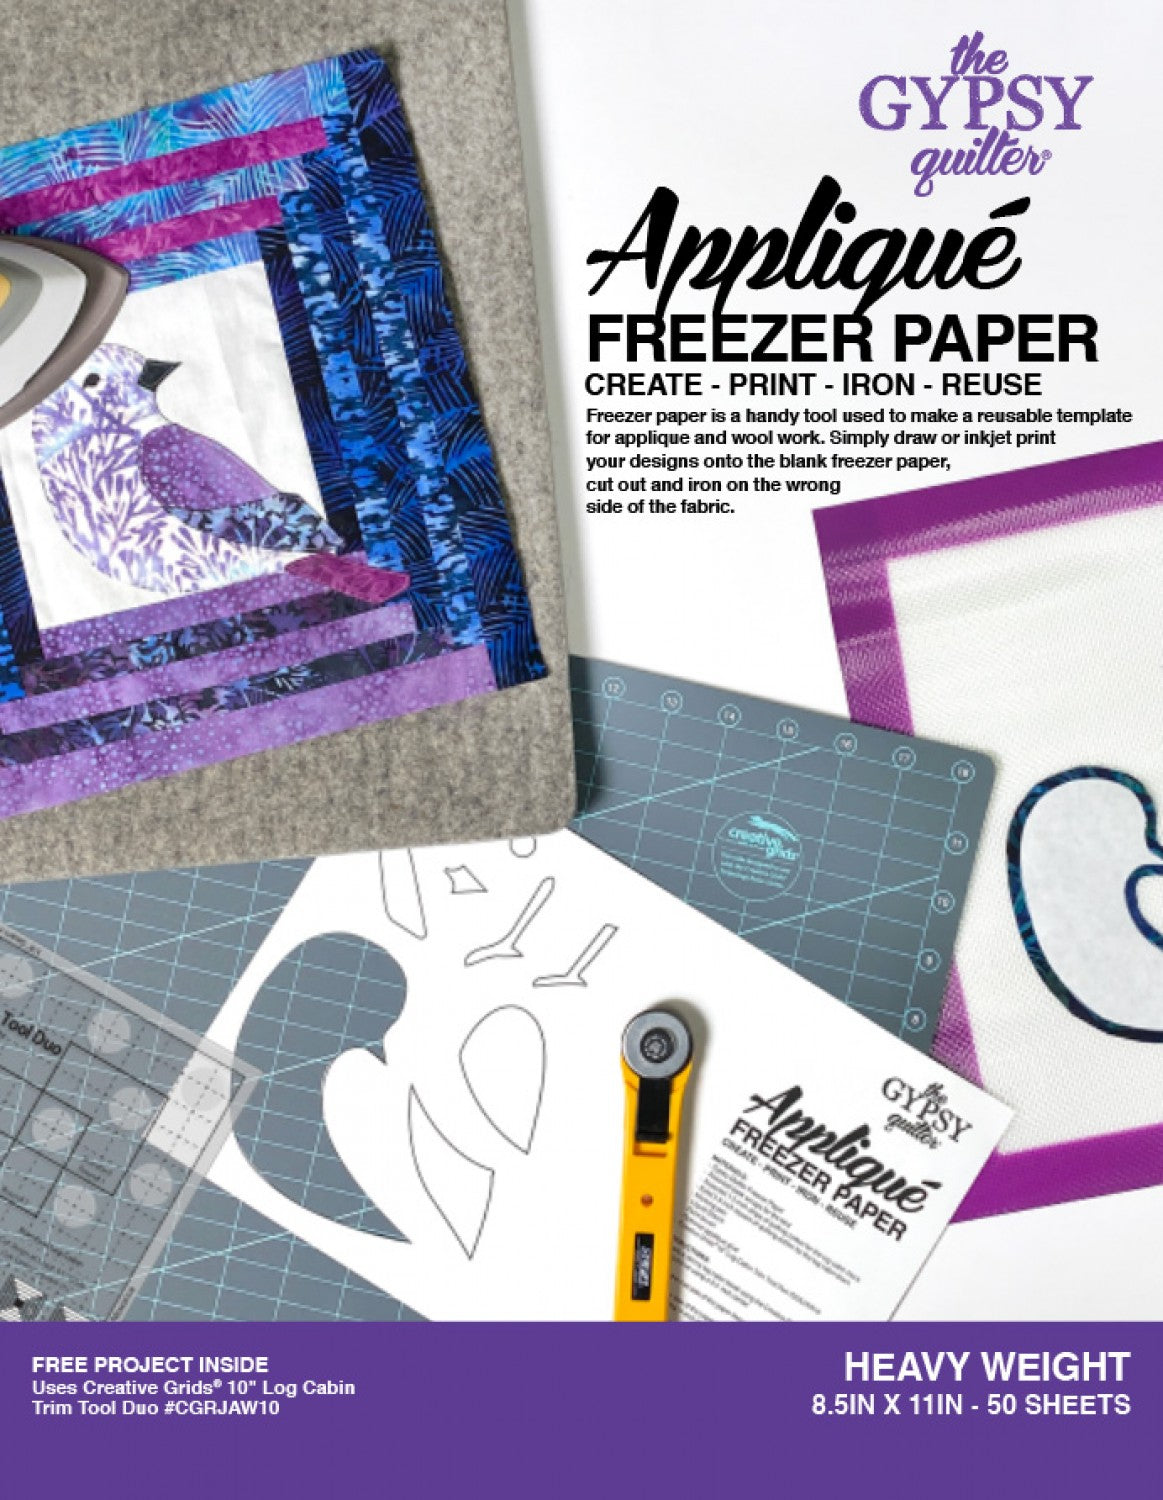 Applique Freezer Paper by The Gypsy Quilter – Red Thread Studio